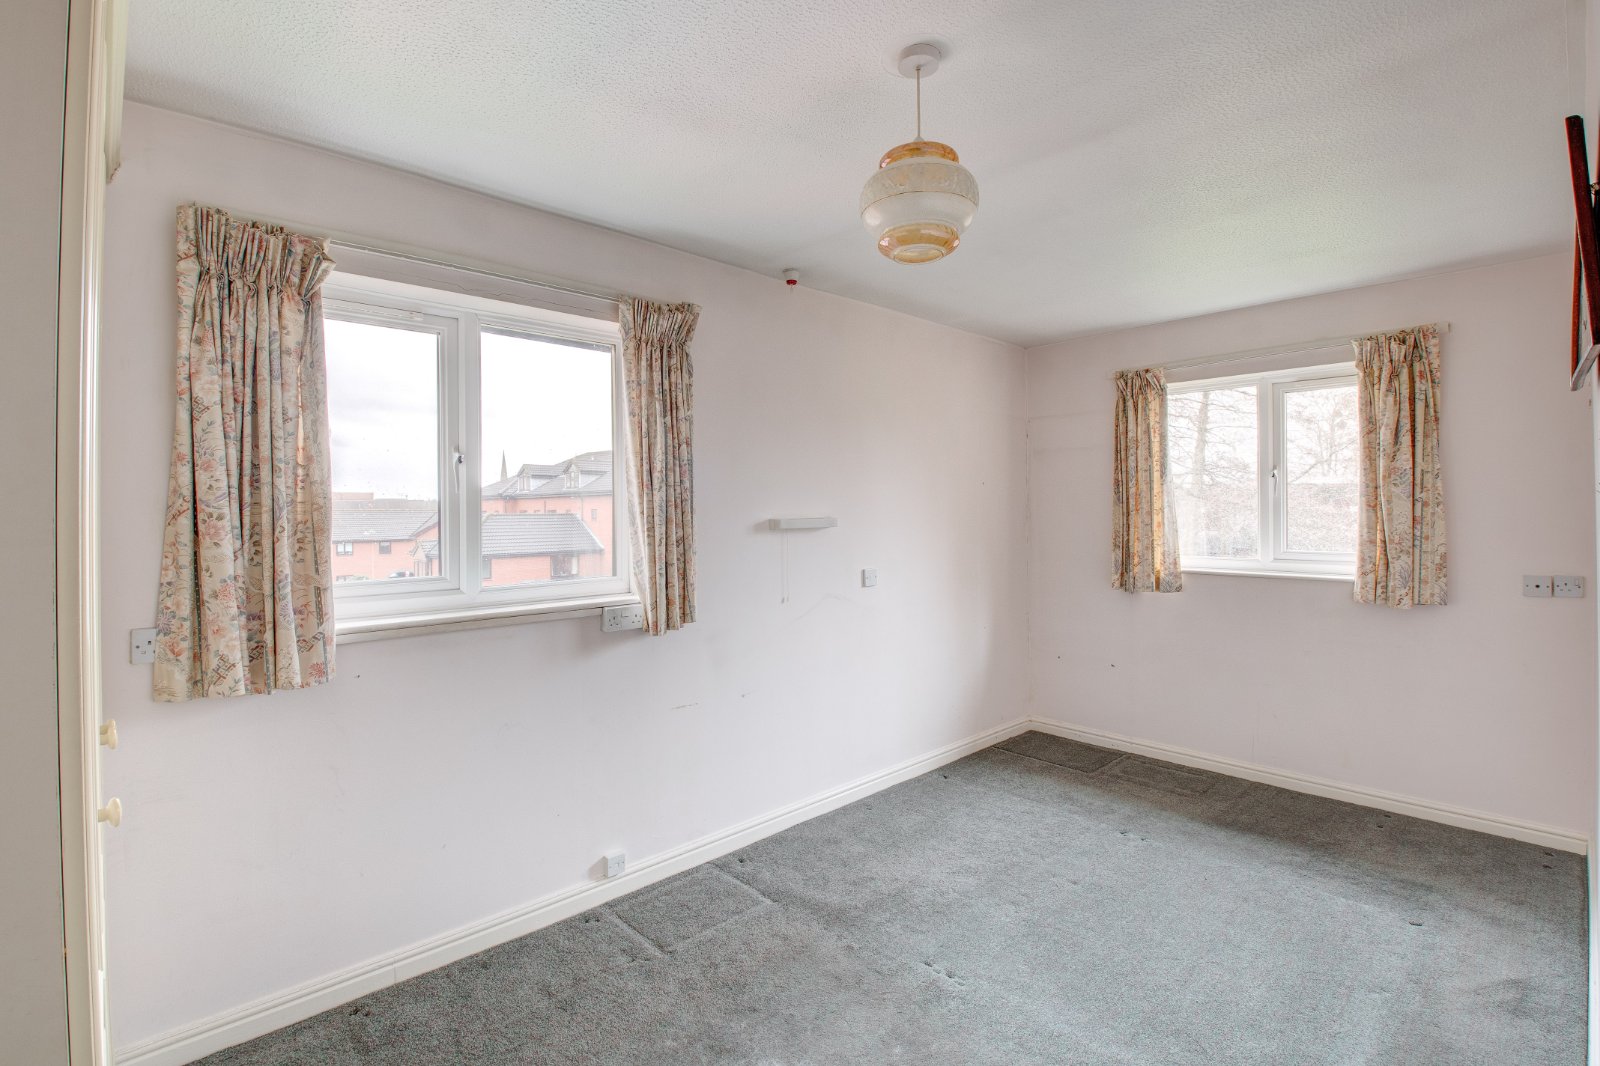 1 bed  for sale in Housman Park, Bromsgrove  - Property Image 8